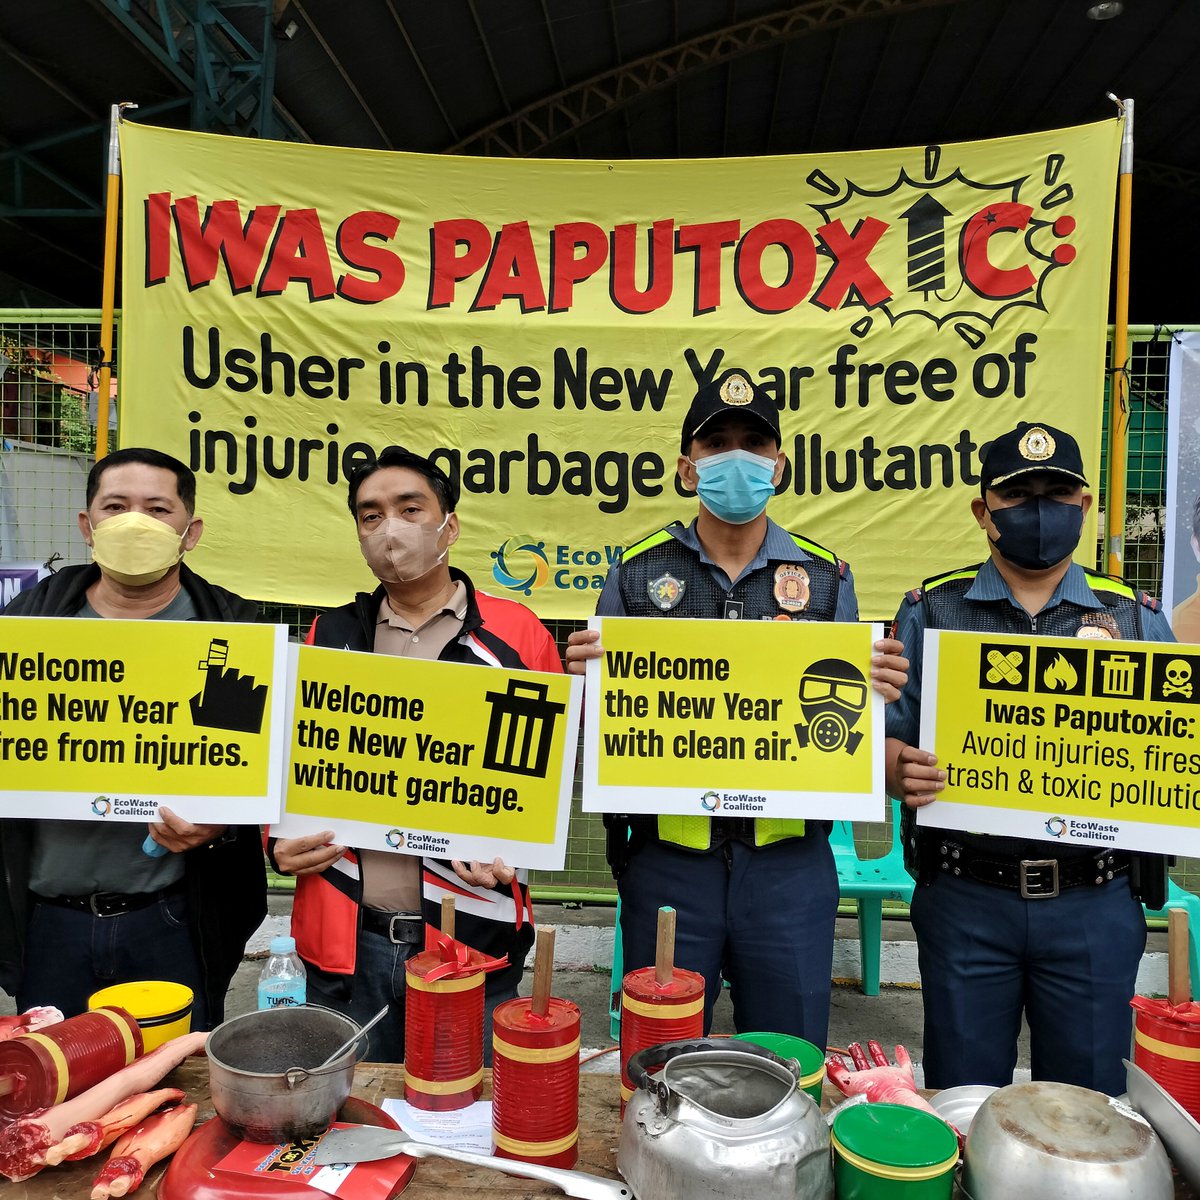 PRESS RELEASE | In its Iwas Paputoxic drive at Brgy. Bagong Silang, Caloocan City, @EWCoalition linked arms w/ barangay, health, fire & police officers to encourage the public to welcome 2023 sans fireworks-related injuries, fires & waste pollutants. 📝: bit.ly/3PYfIdx